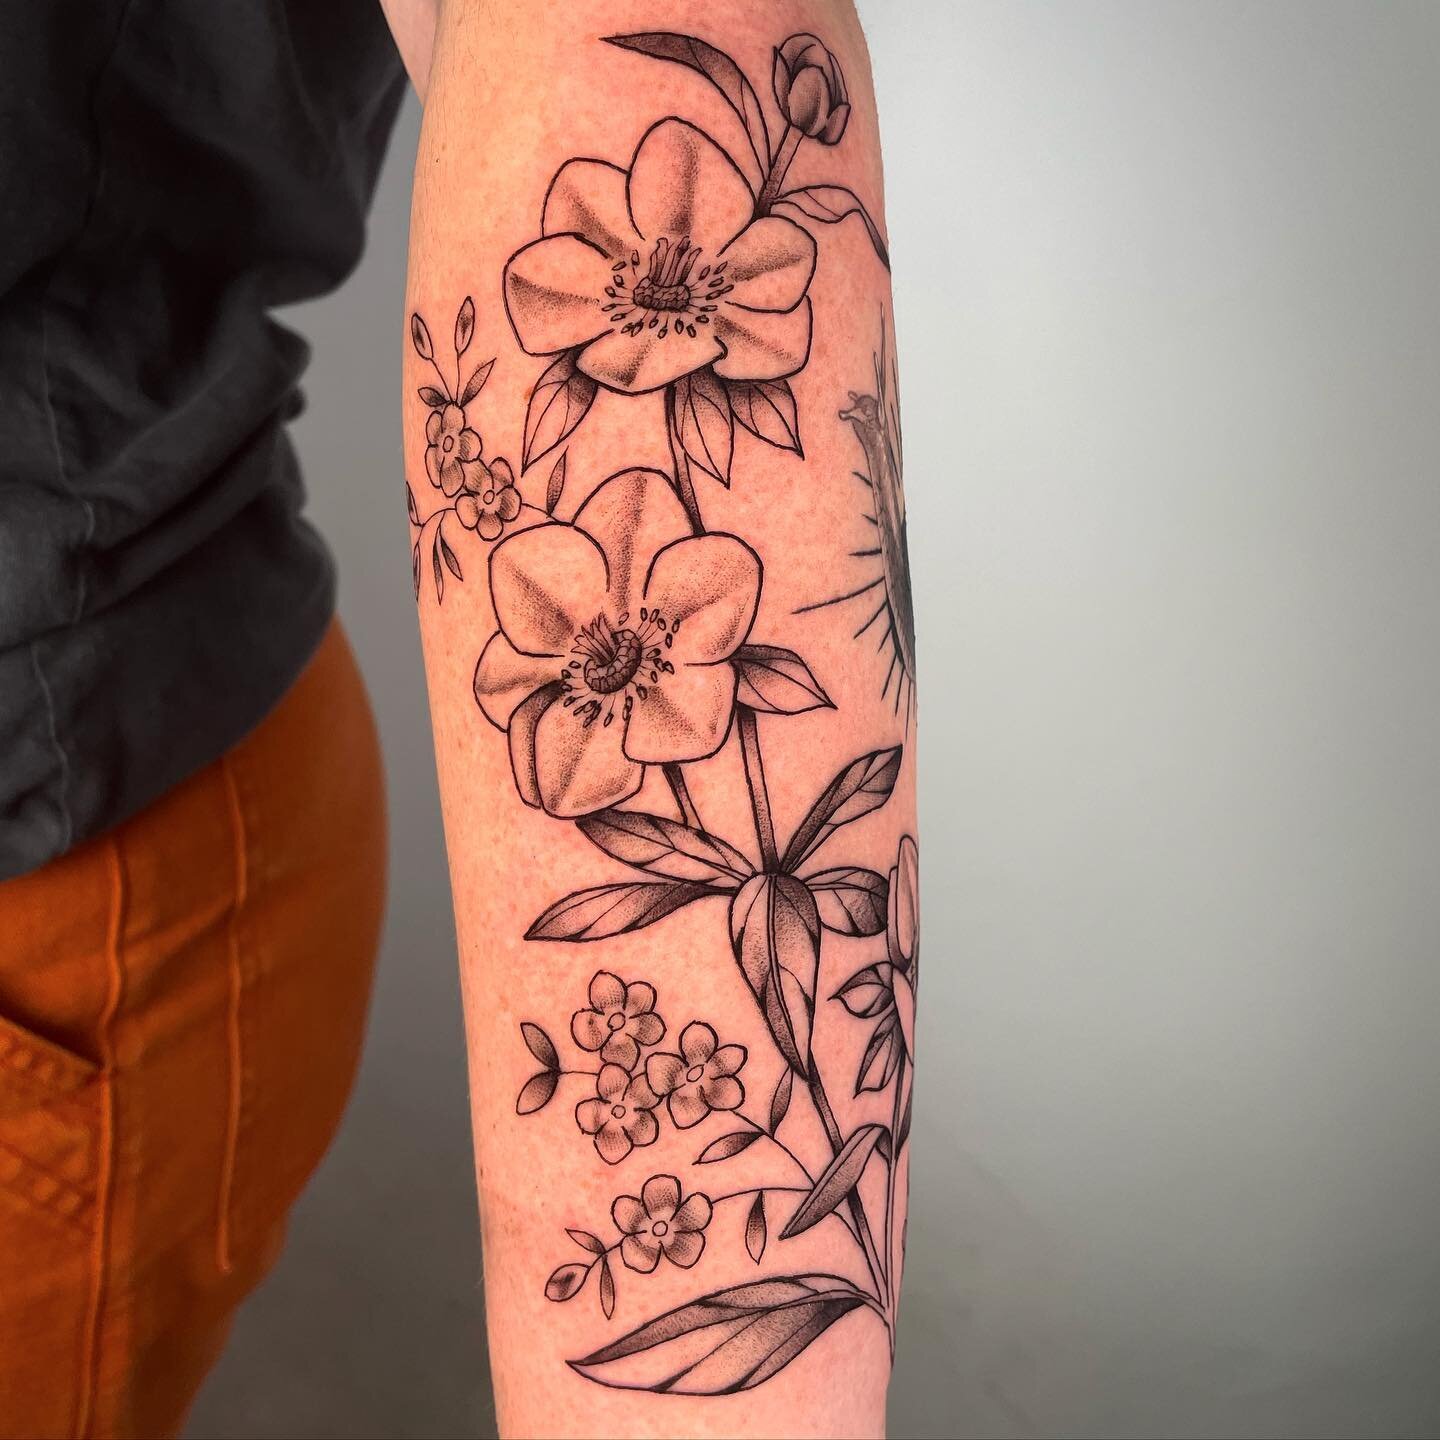 Hellebore and phlox for Taylor 🌸 tucked up to a super nice one by @jsteeletattoos. Thanks so much! 
.
.
.
.
.
.
.
.
#eugenetattoo #eugeneoregon #eugene #oregon #oregontattoo #pnw #pnwtattoo #floraltattoo #botanicaltattoo #illustrativetattoo